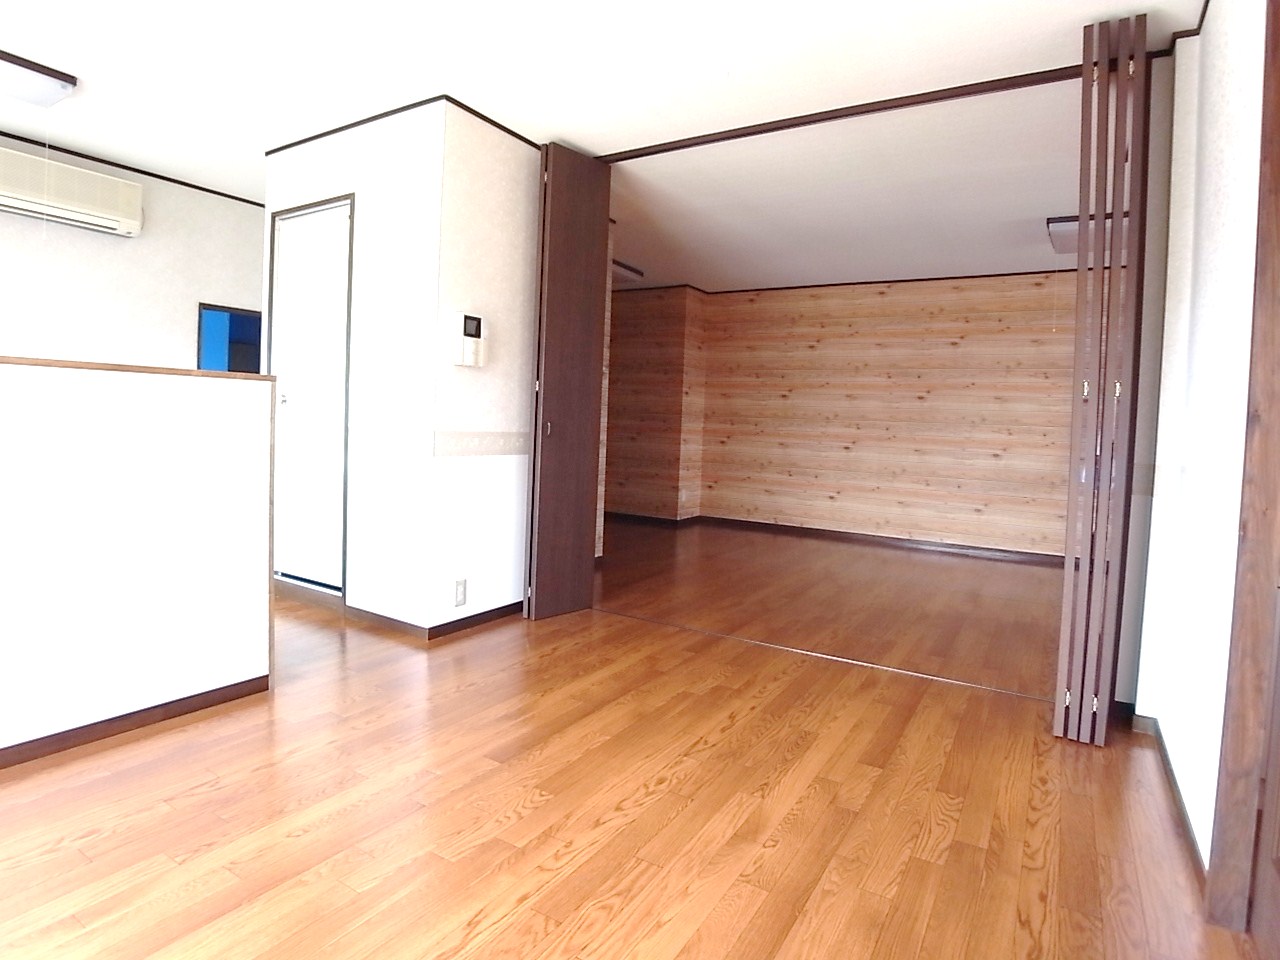 Living and room. Really spacious interior ☆ Renovated is property